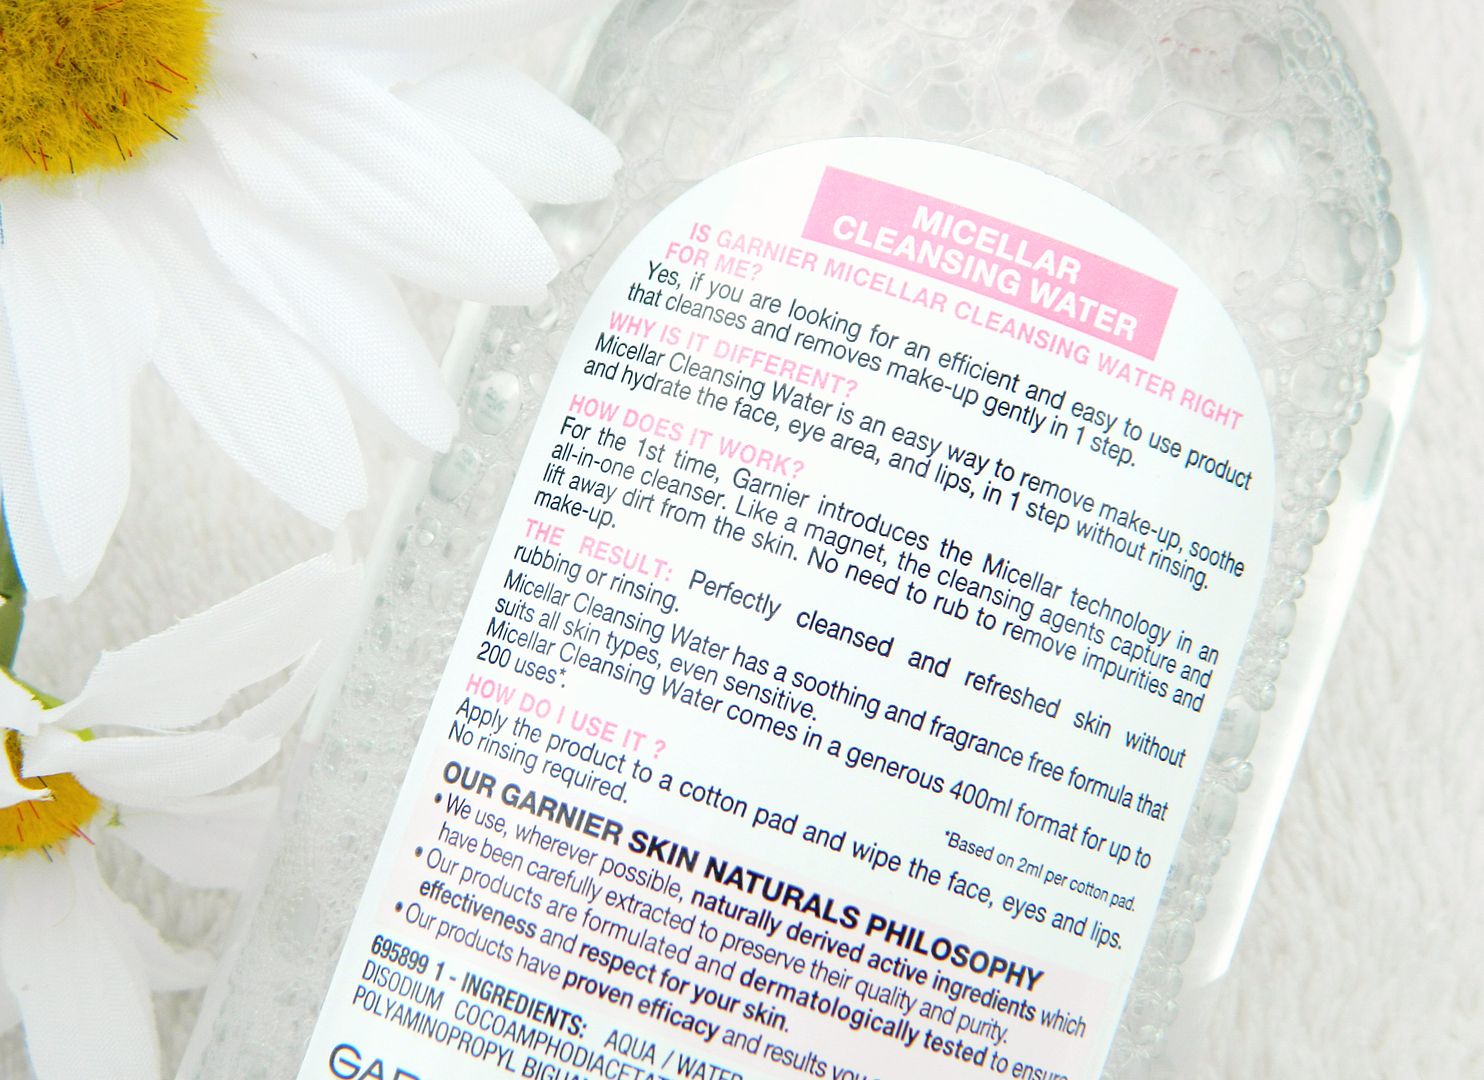 Daily Favourites Garnier Micellar Cleansing Water Review Hot To Use Directions Ingredients Benefits Belle-Amie UK Beauty Fashion Lifestyle Blog